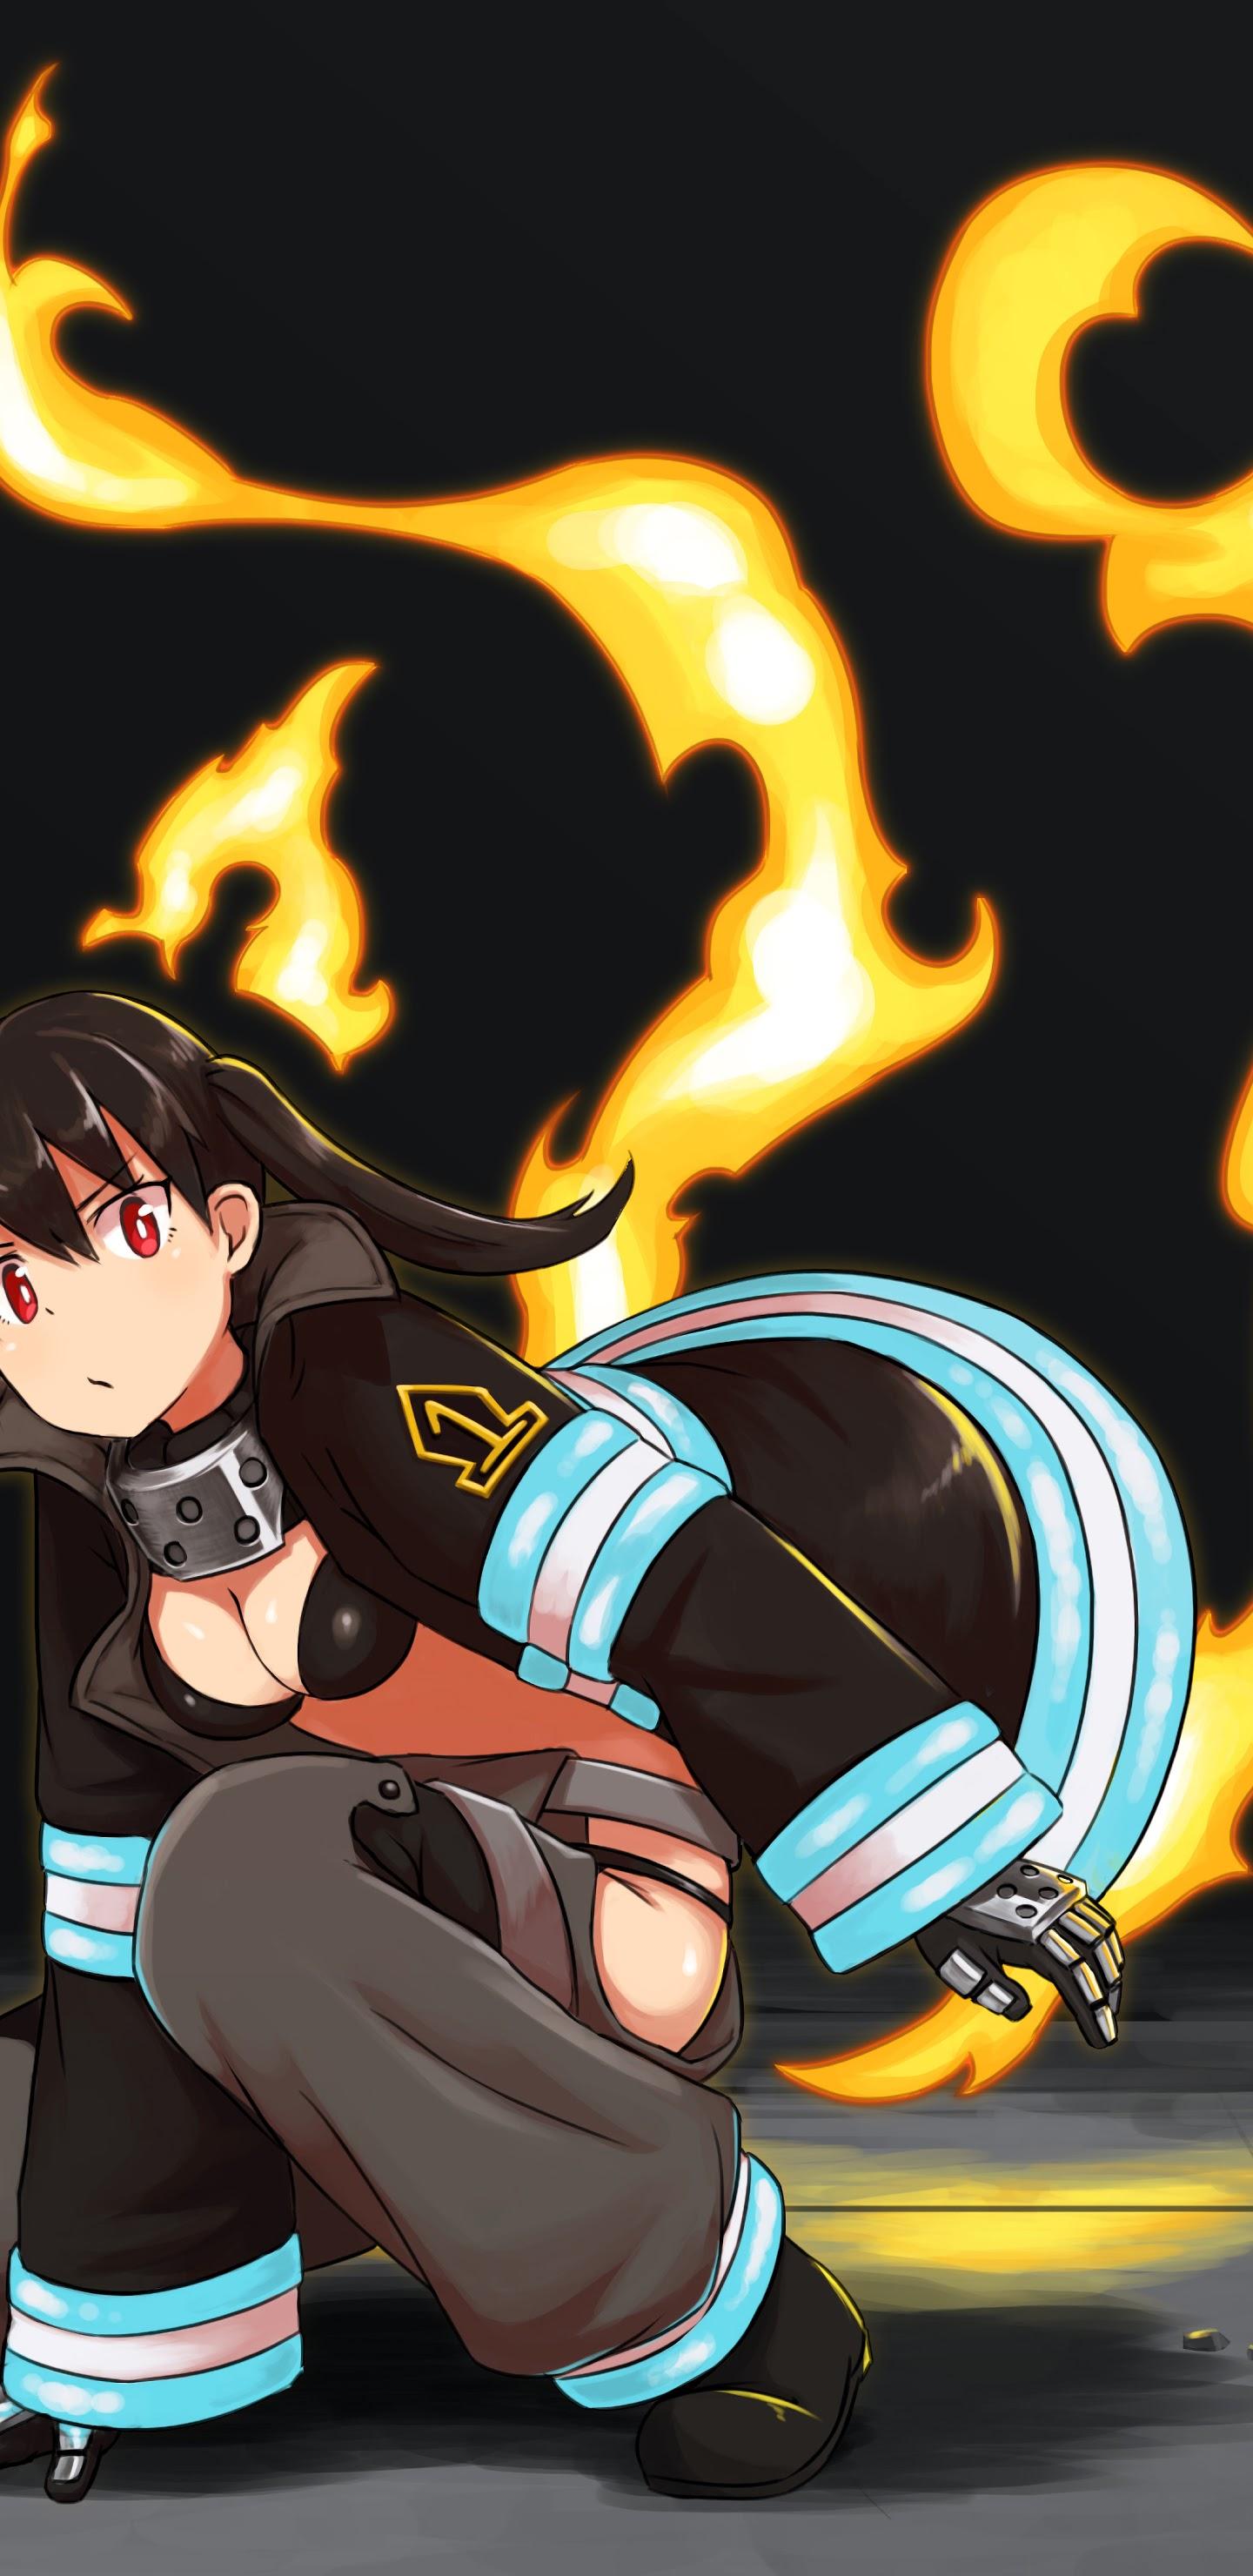 anime fire force wallpapers wallpaper cave on anime fire force wallpapers